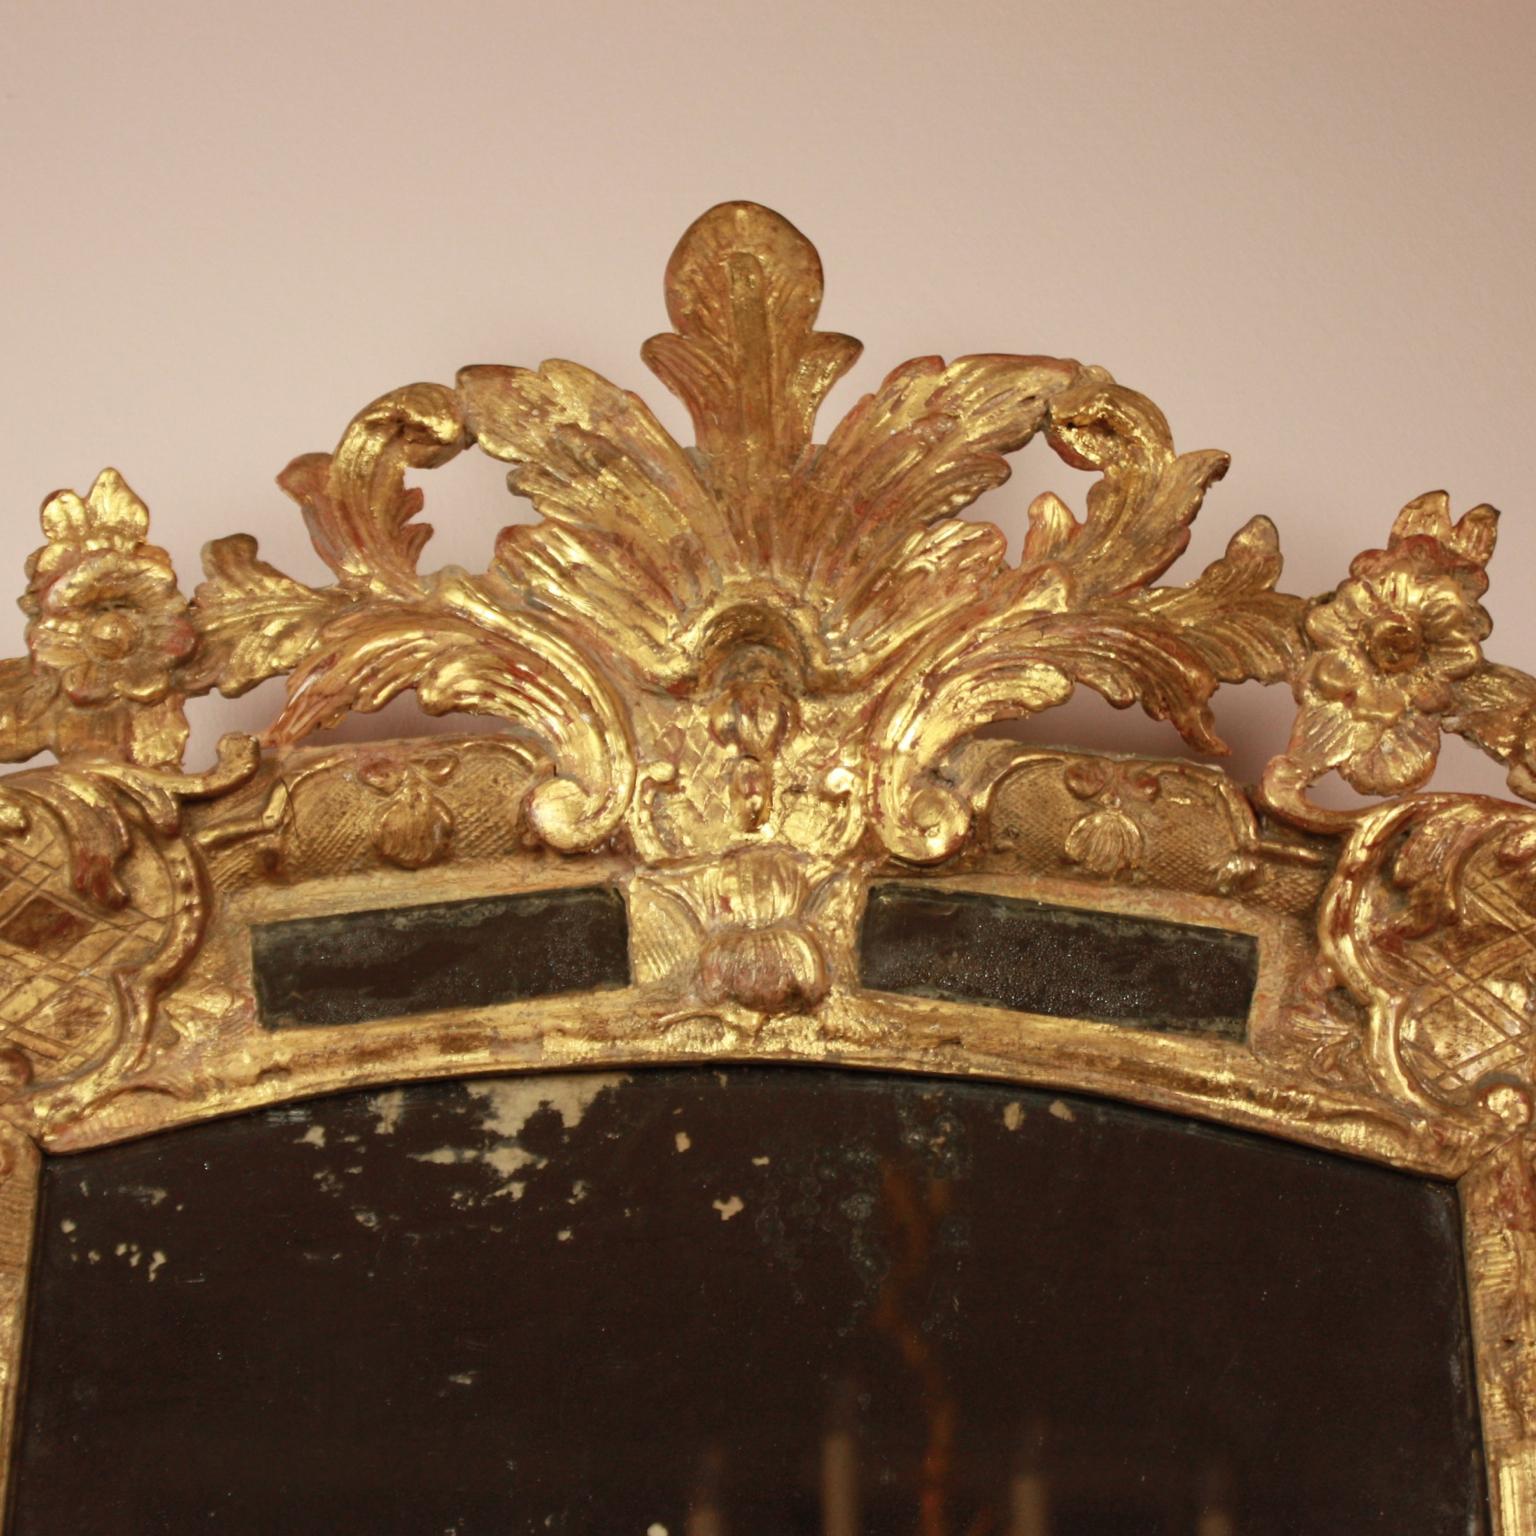 French Early 18th Century Régence Gilt and Carved Wood Mirror

An early 18th century Régence giltwood mirror of slightly arched shape surrounded by marginal mirror plates on all sides set within enriched mouldings. The giltwood cresting of acanthus